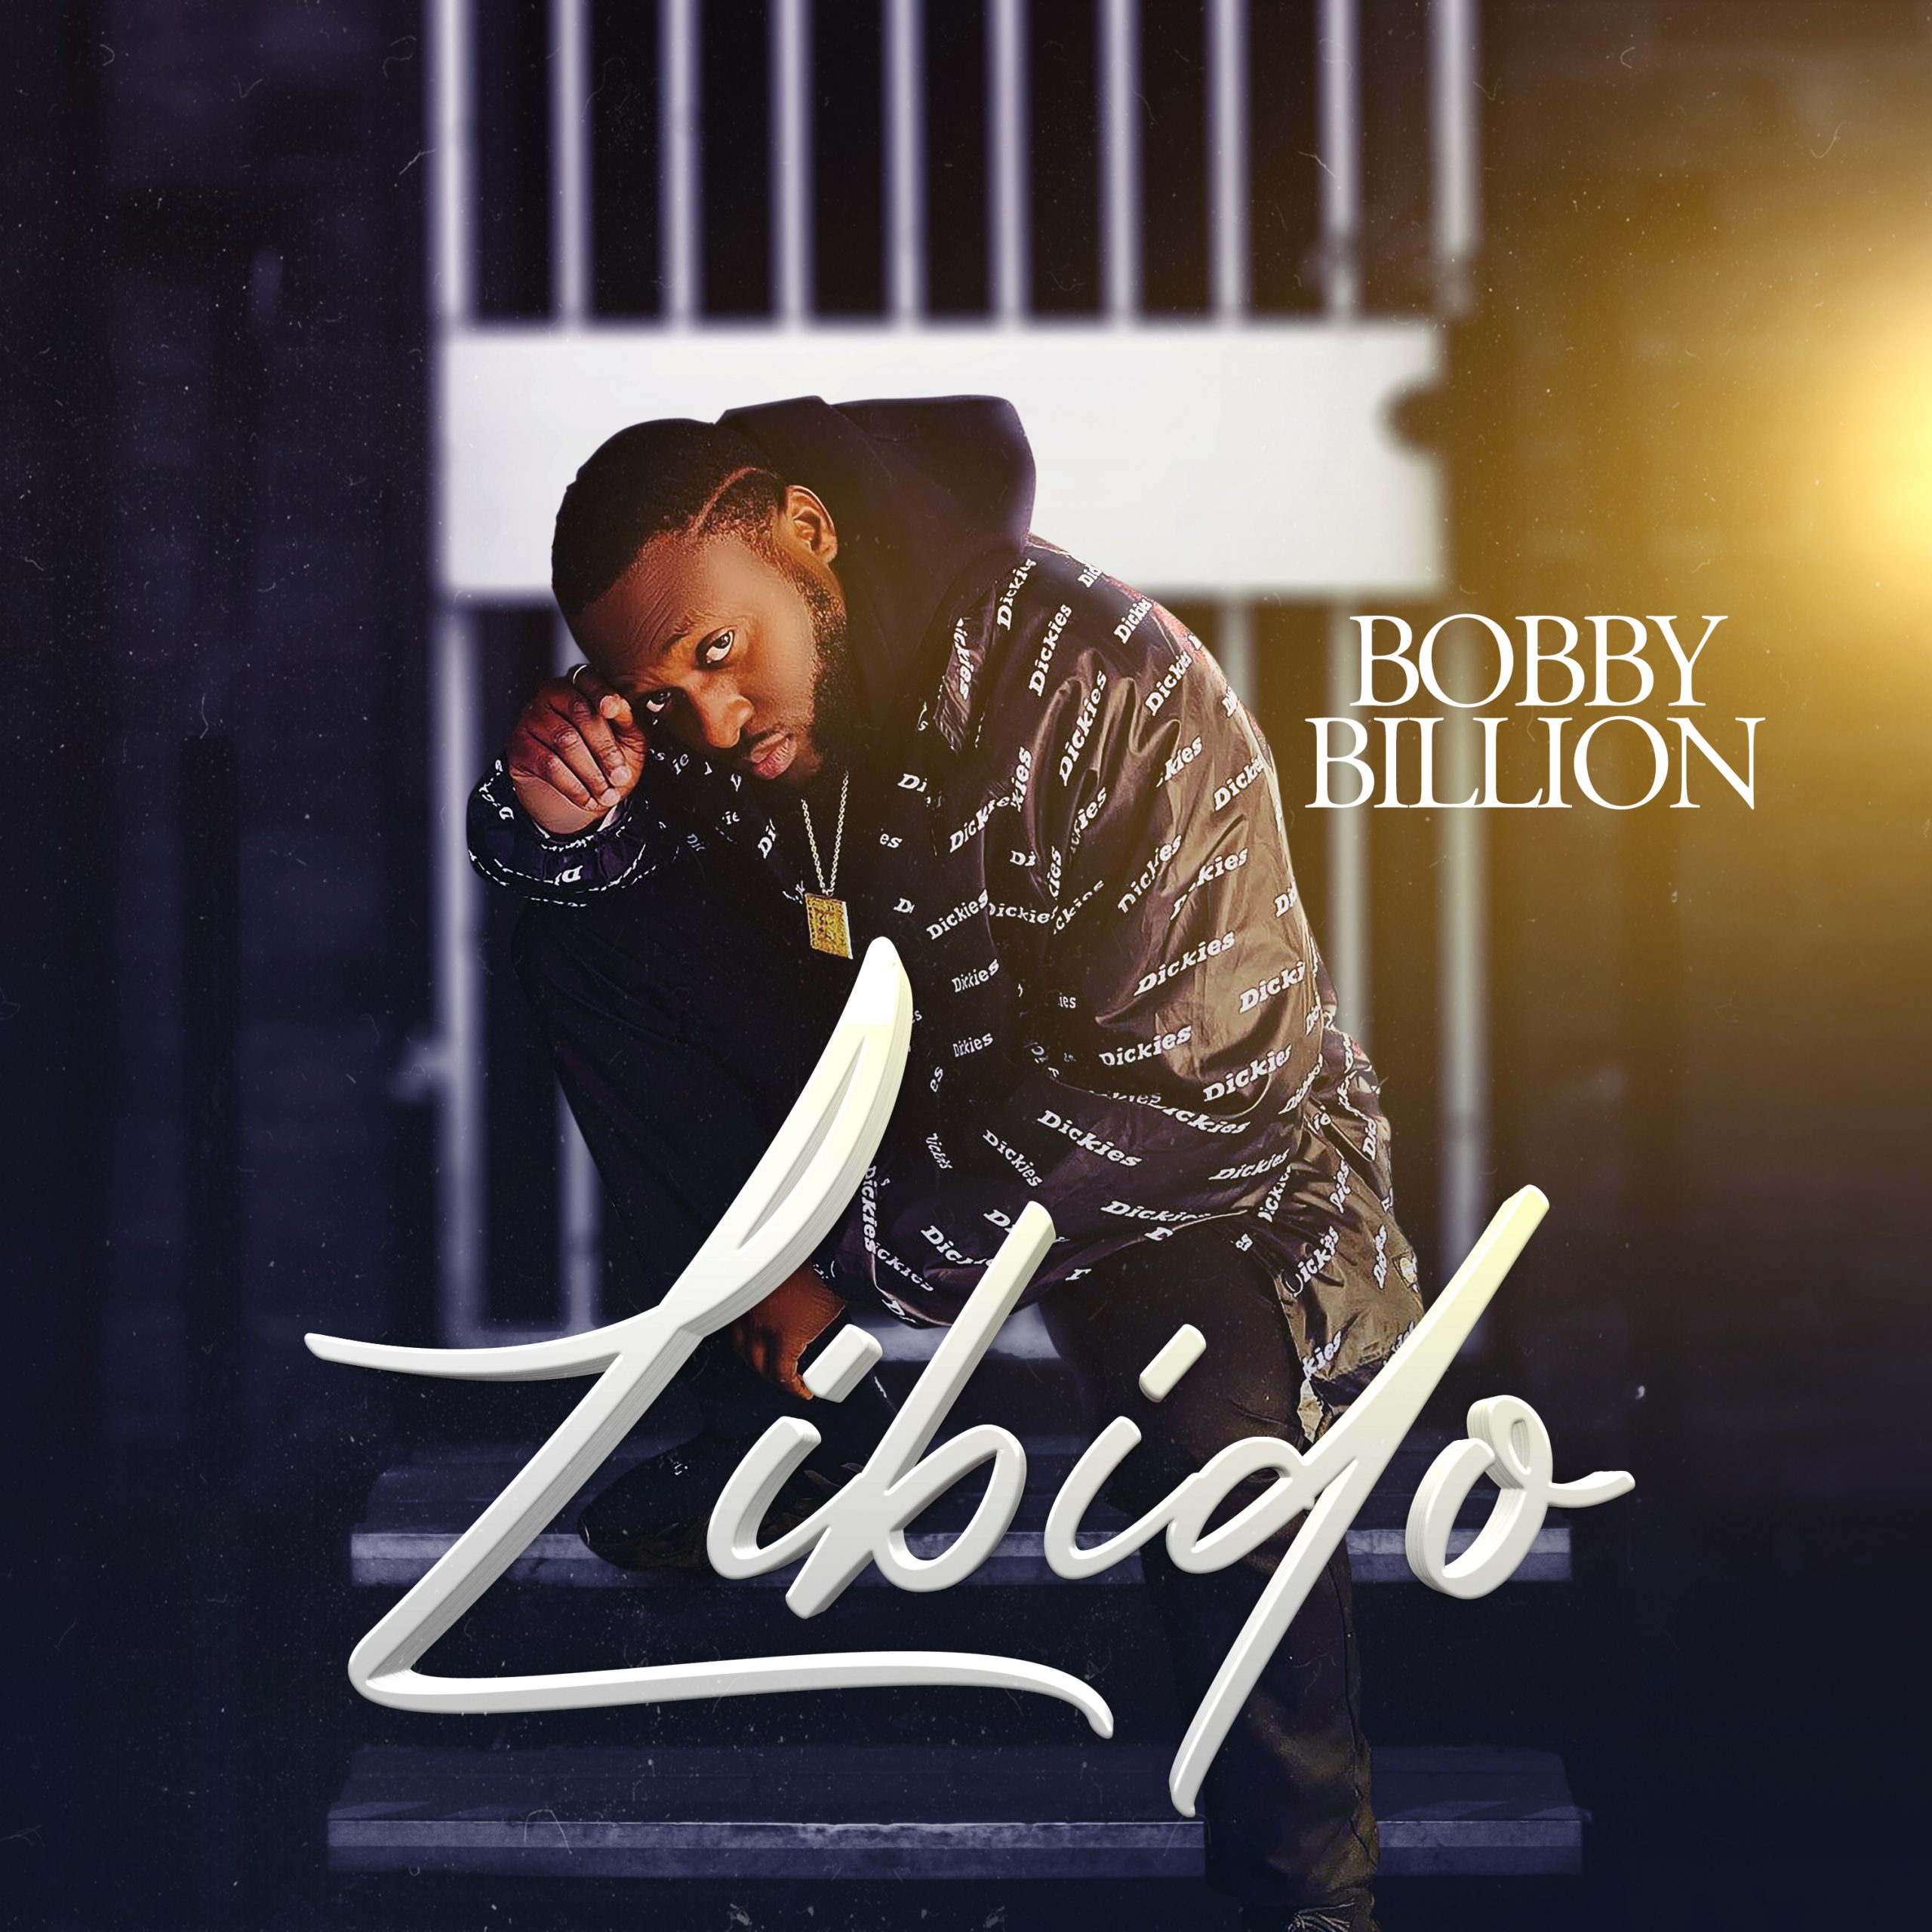 ‘Bobby Billion’ is a fast-rising independent afrobeat artist, looking to bless the world with new single ‘Libido’.